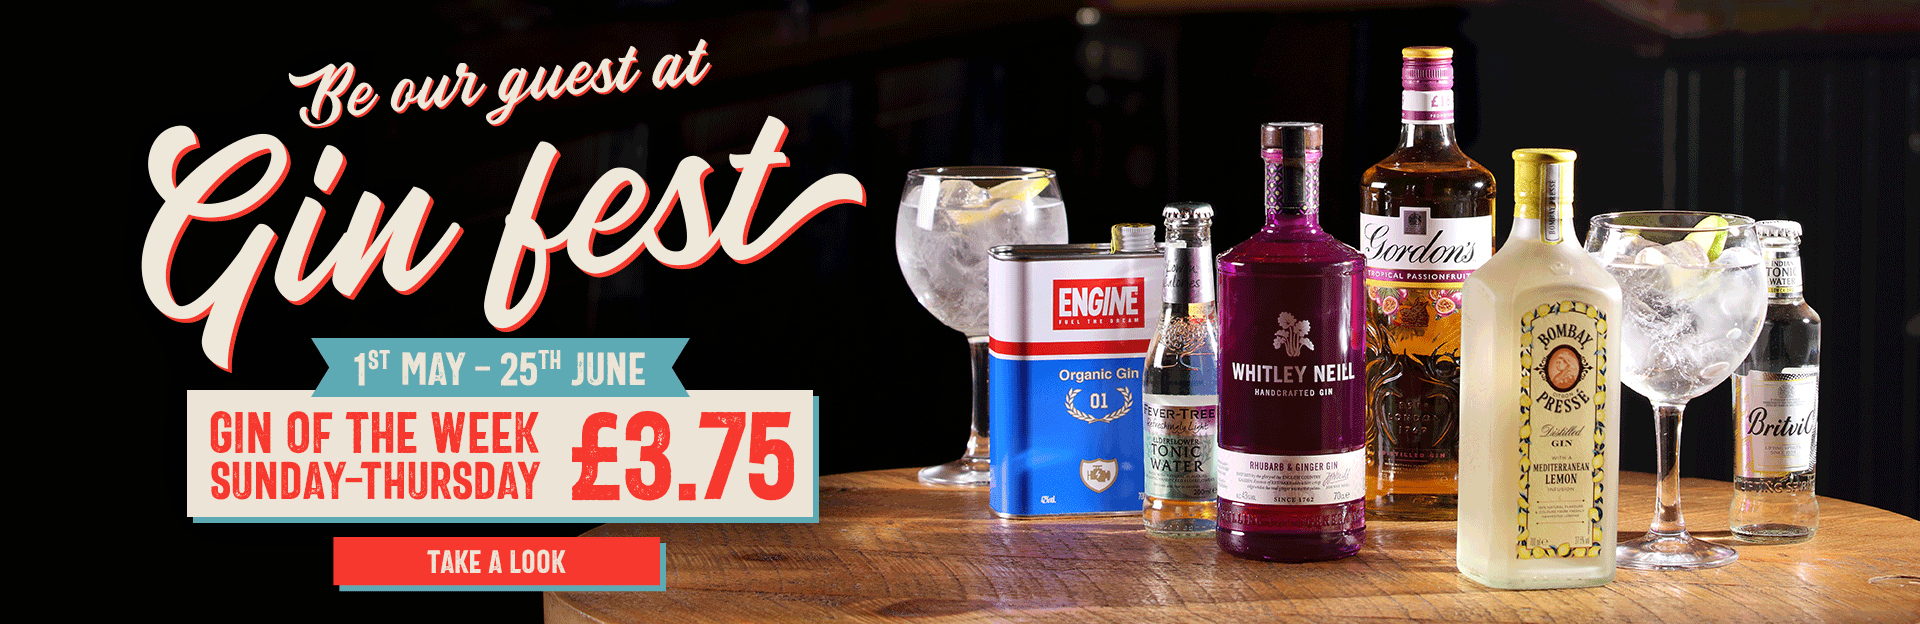 Gin Fest at The Old Market Tavern